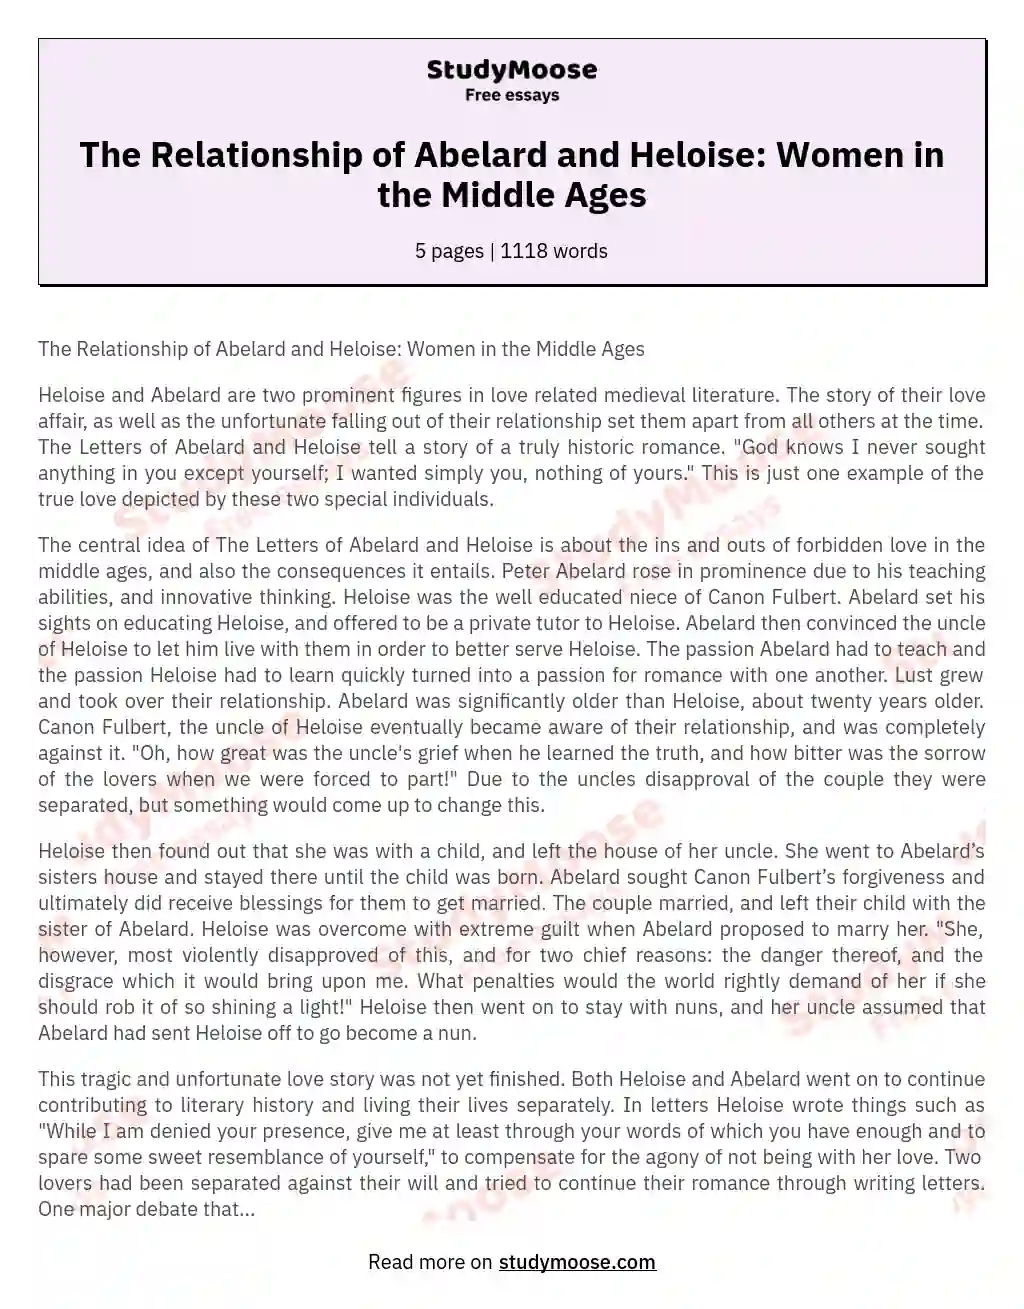 The Relationship of Abelard and Heloise: Women in the Middle Ages